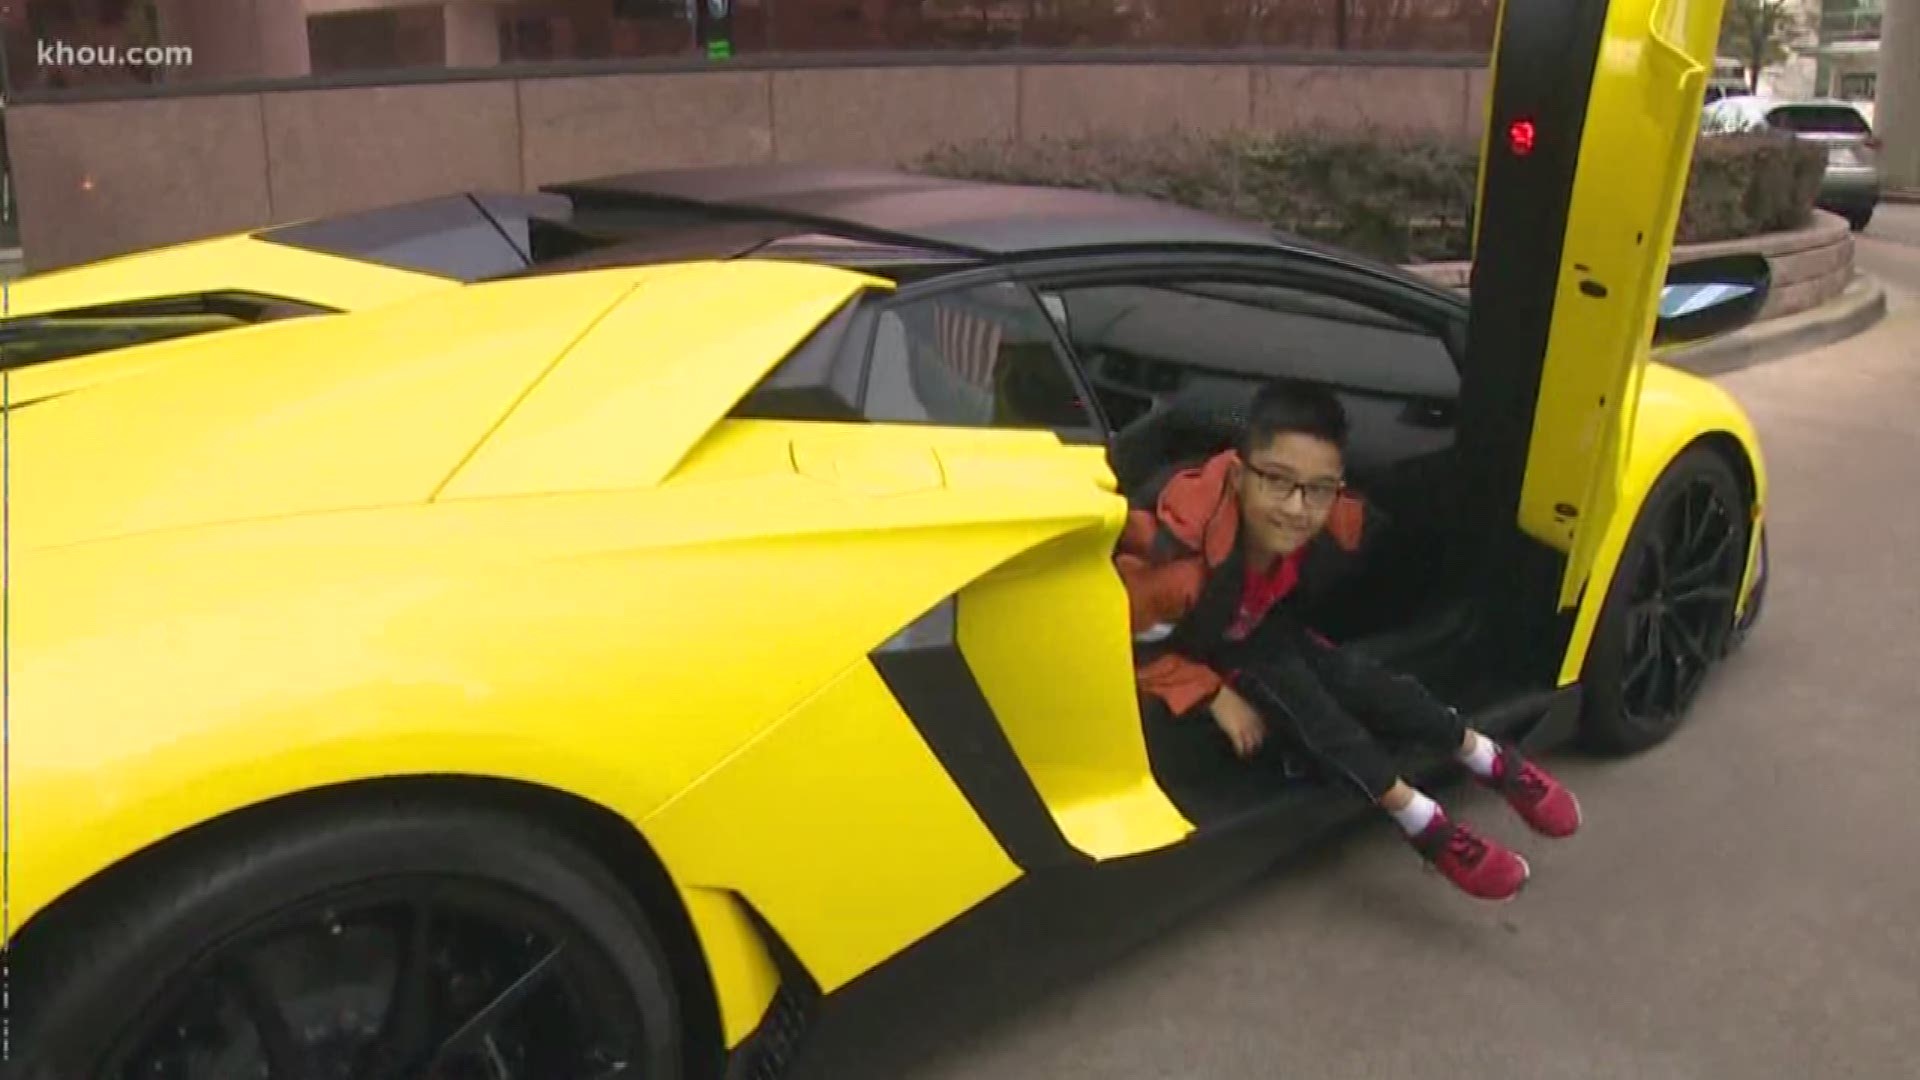 Rushi Gandhi, 8, received the ride of a lifetime Thursday in his dream car - a Lamborghini - on his way to Texas Children's Hospital where he receives a blood transfusion every three weeks.